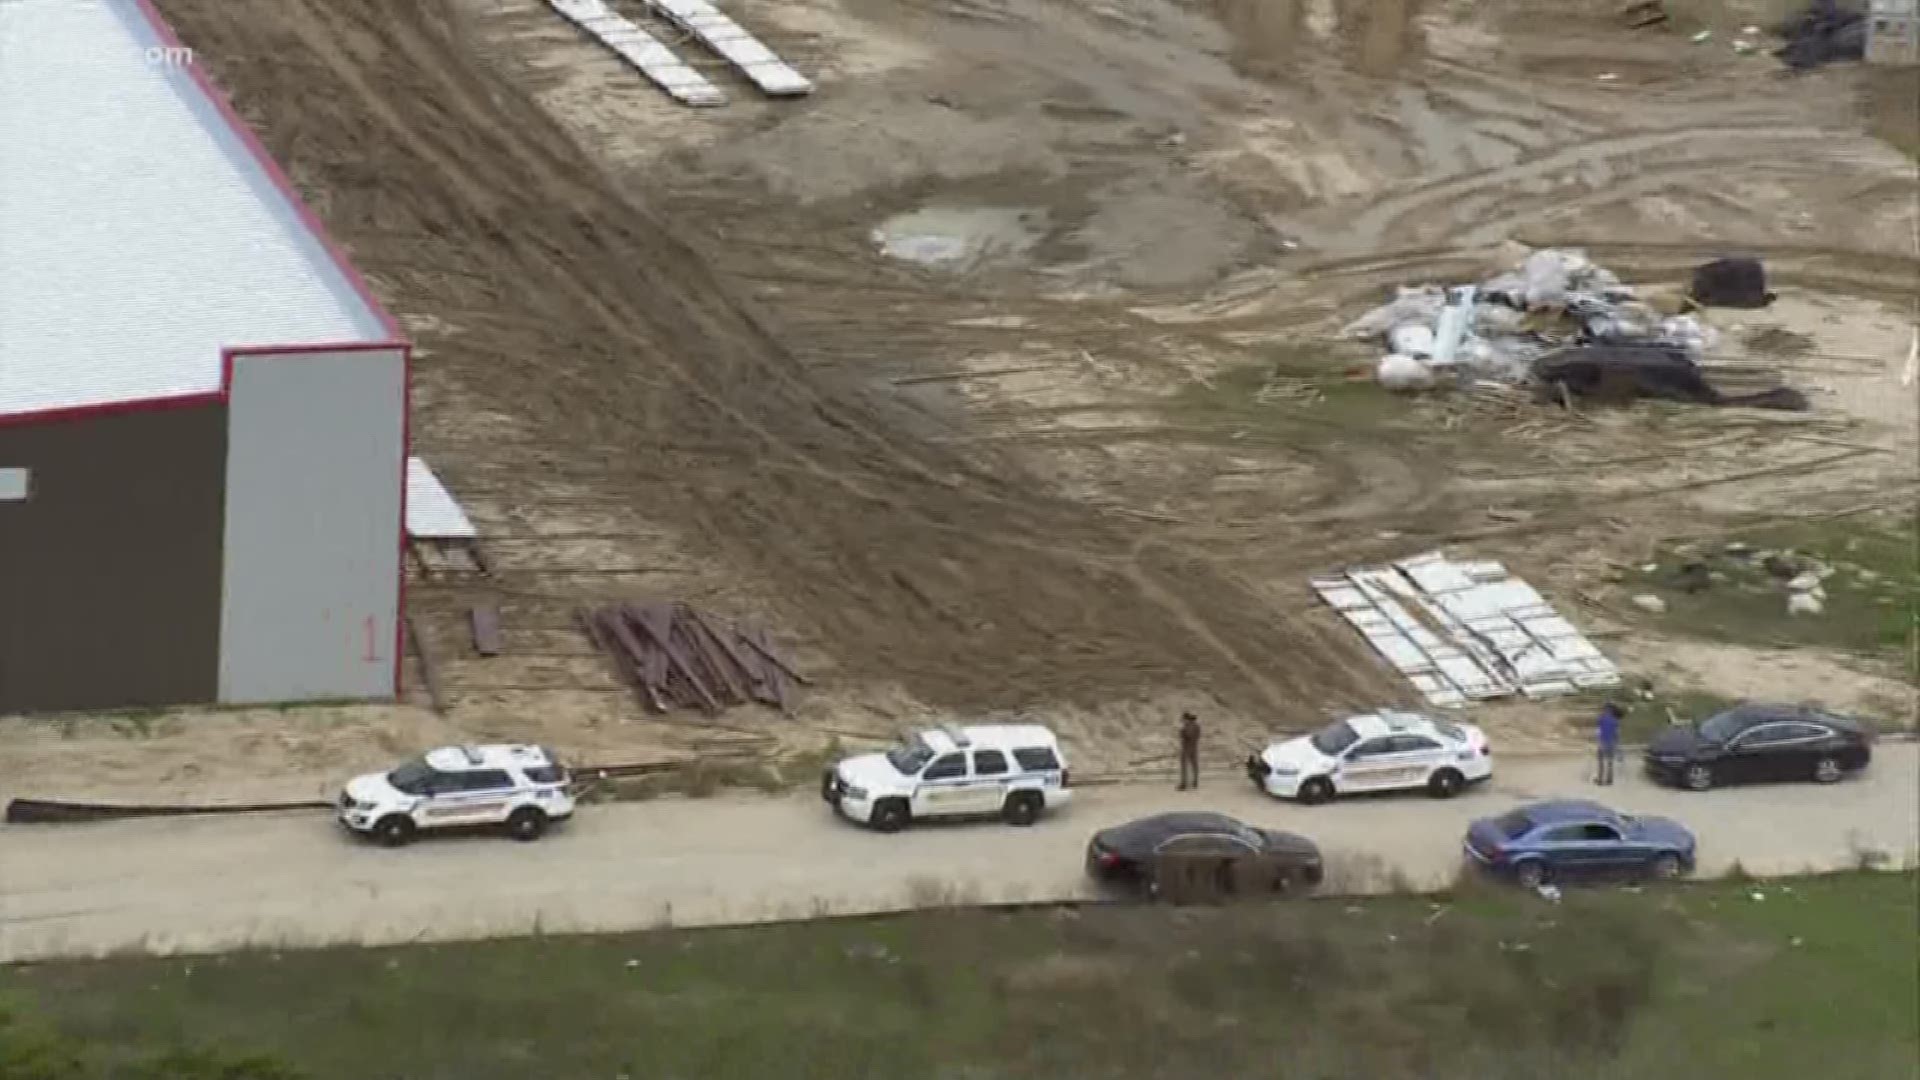 Construction workers said they found what they believe to be a human fetus at a site where they were working. Investigators are trying to identify the remains.